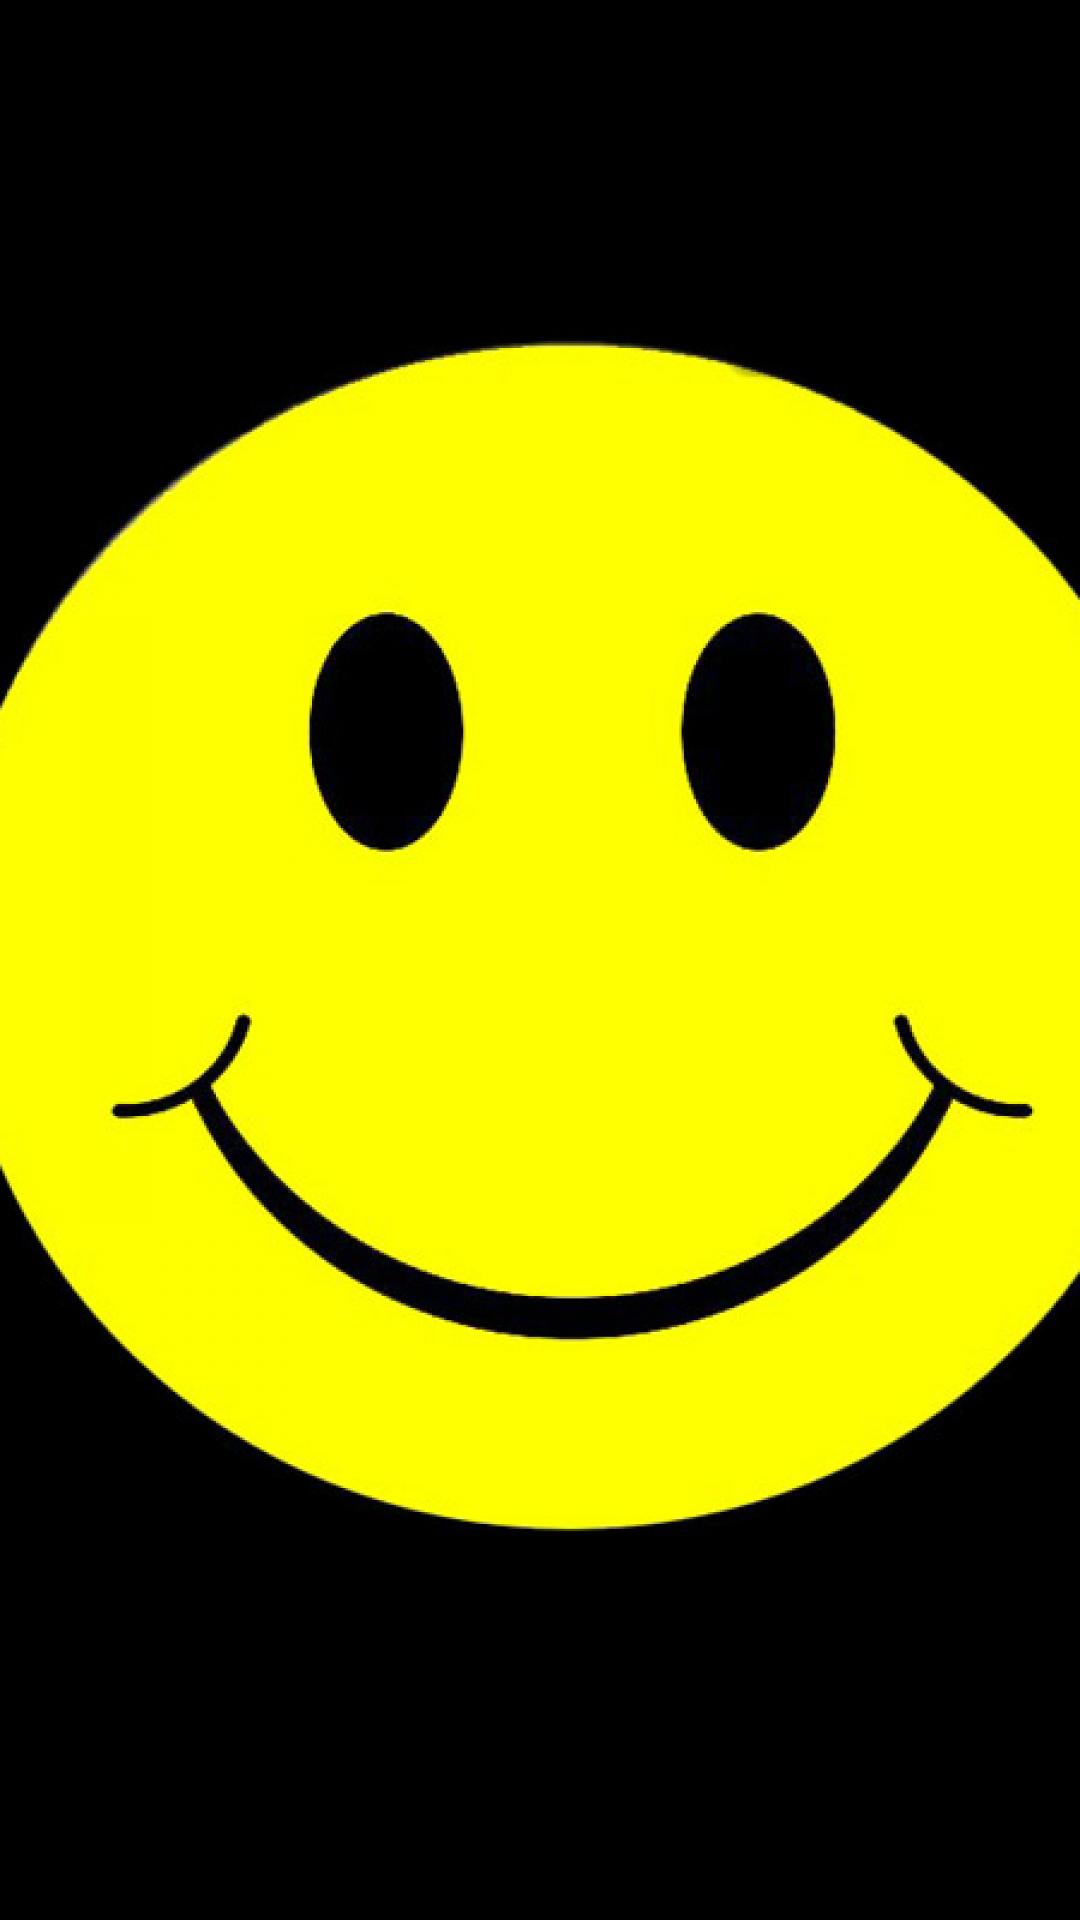 happy smiley face faces black background acid house Q2CD